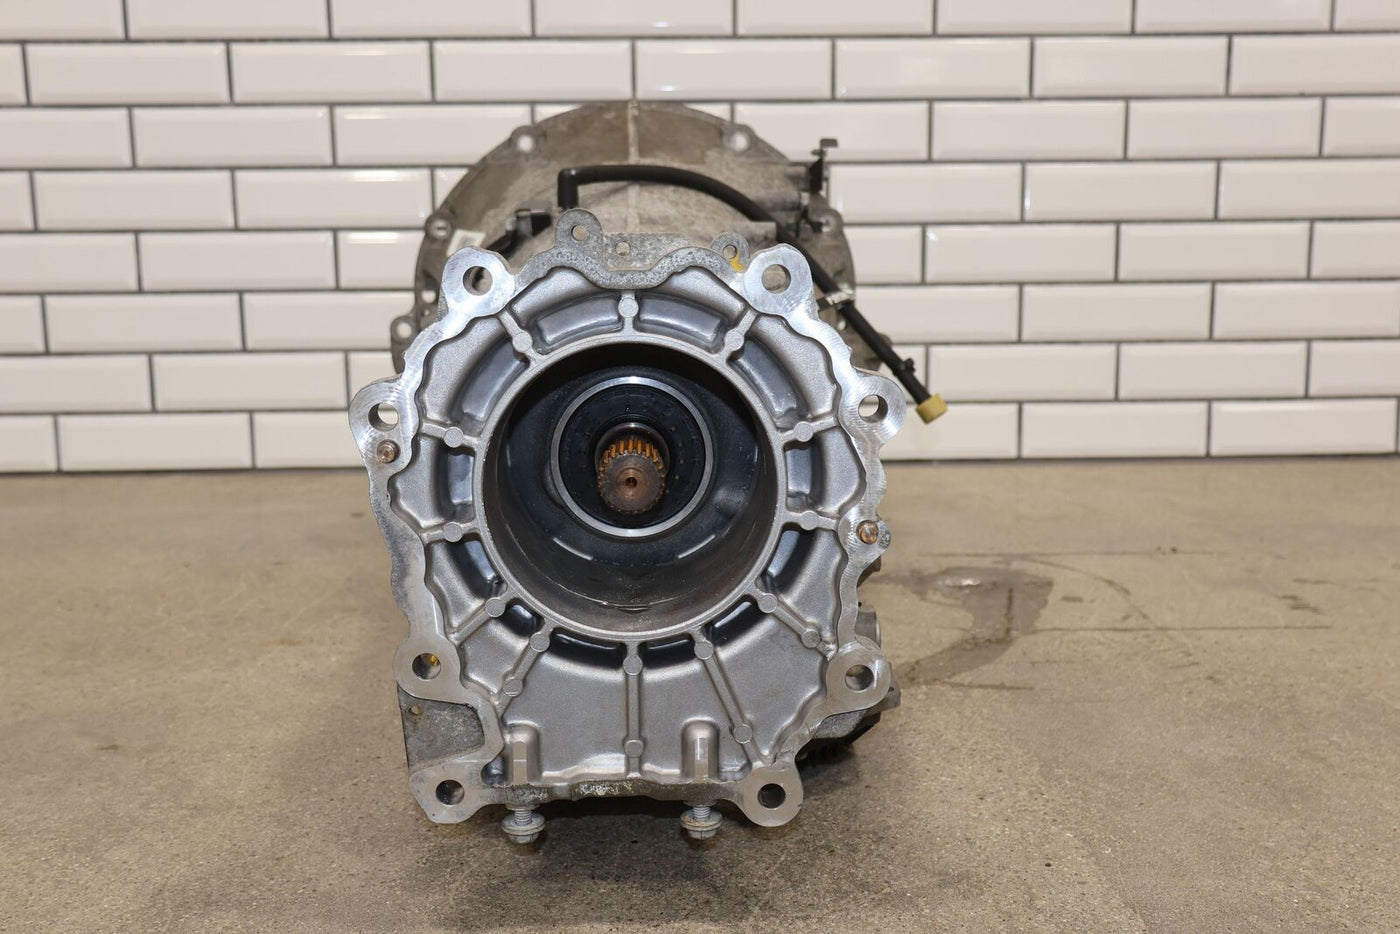 14-17 Jeep Grand Cherokee SRT8 4x4 Automatic Transmission (Unable To Test) 96K